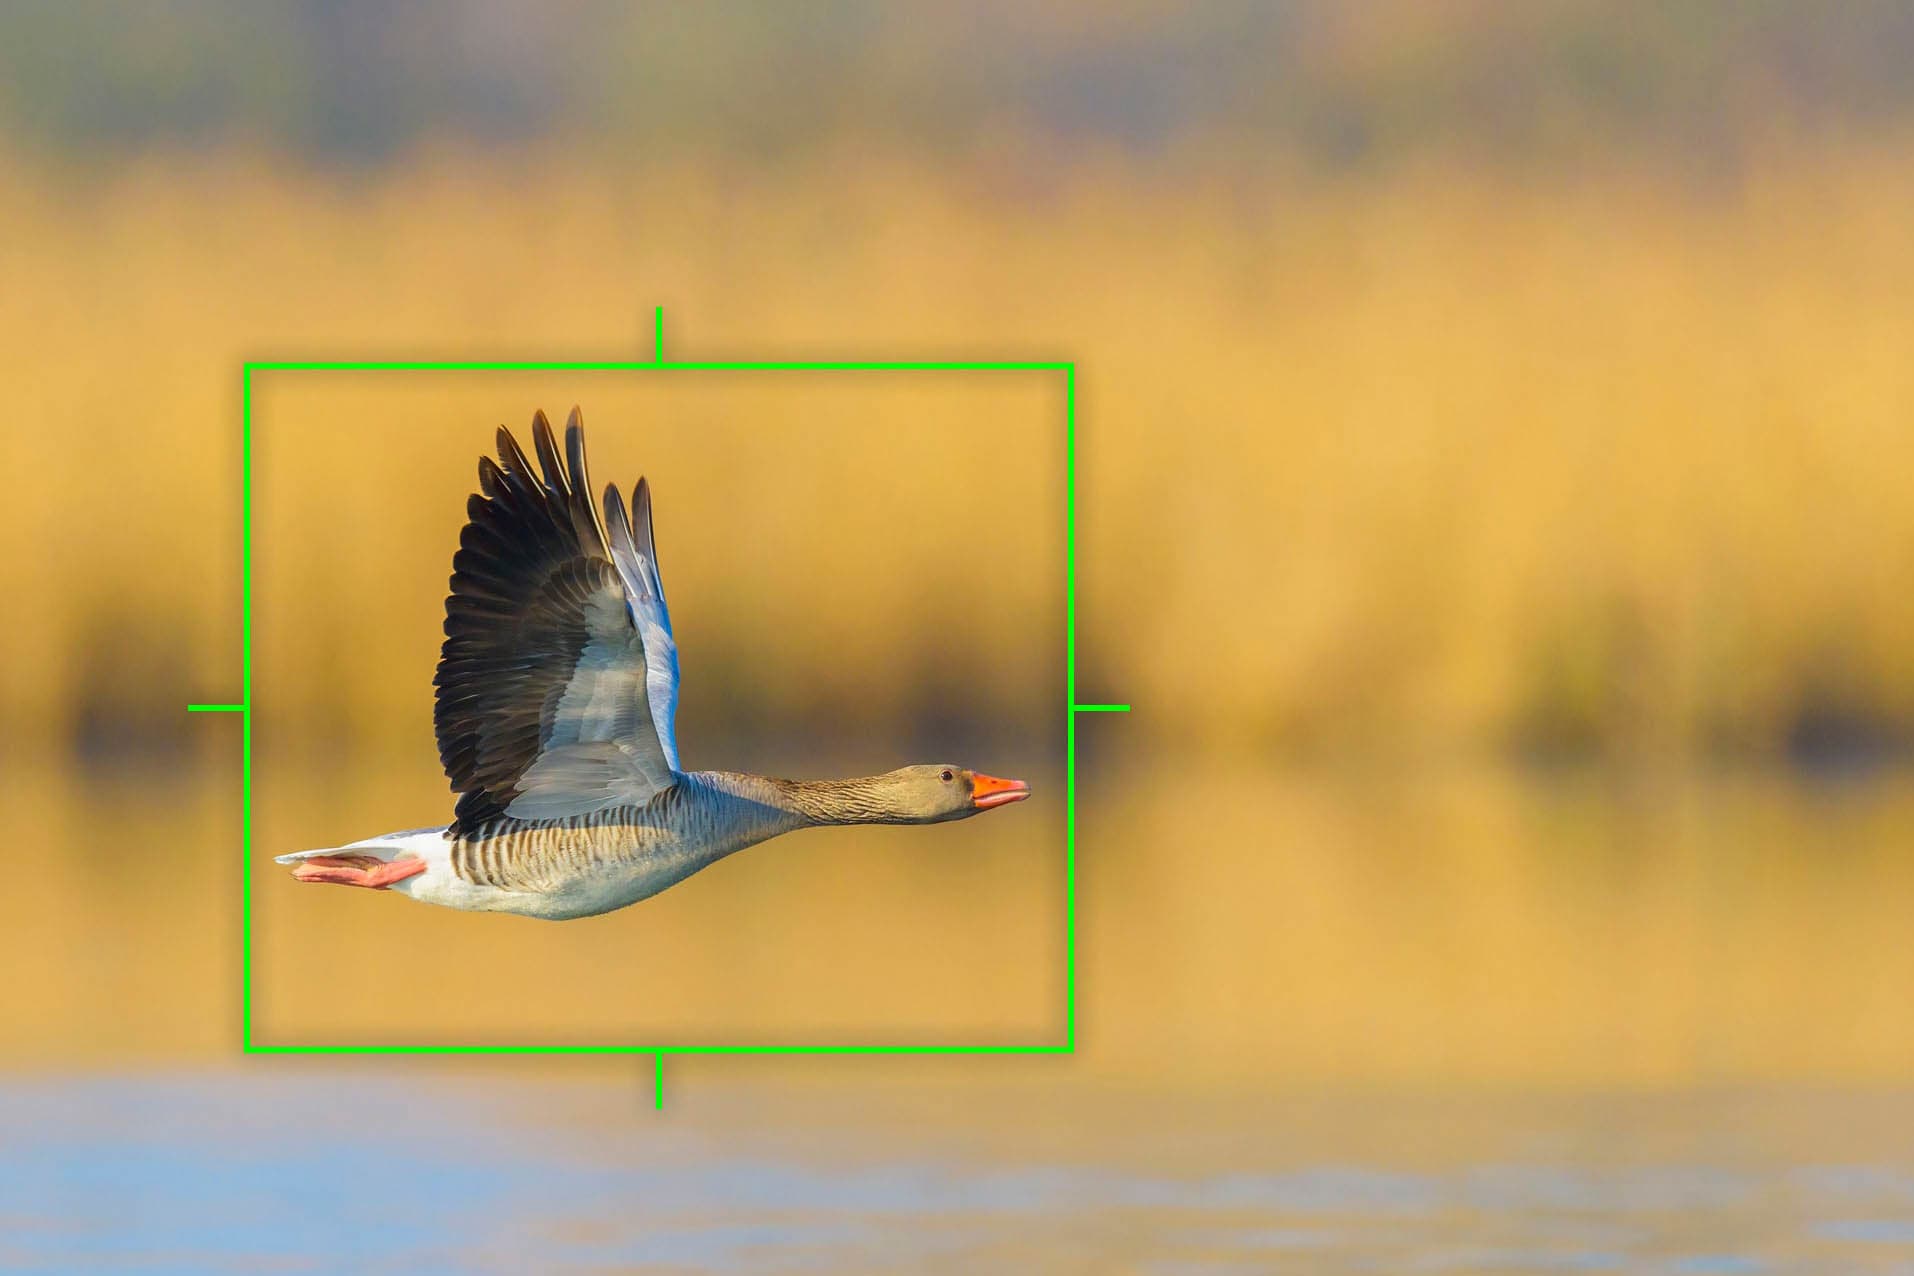 The Olympus E-M1X got a firmware update that added bird recognition auto-focus (AF).